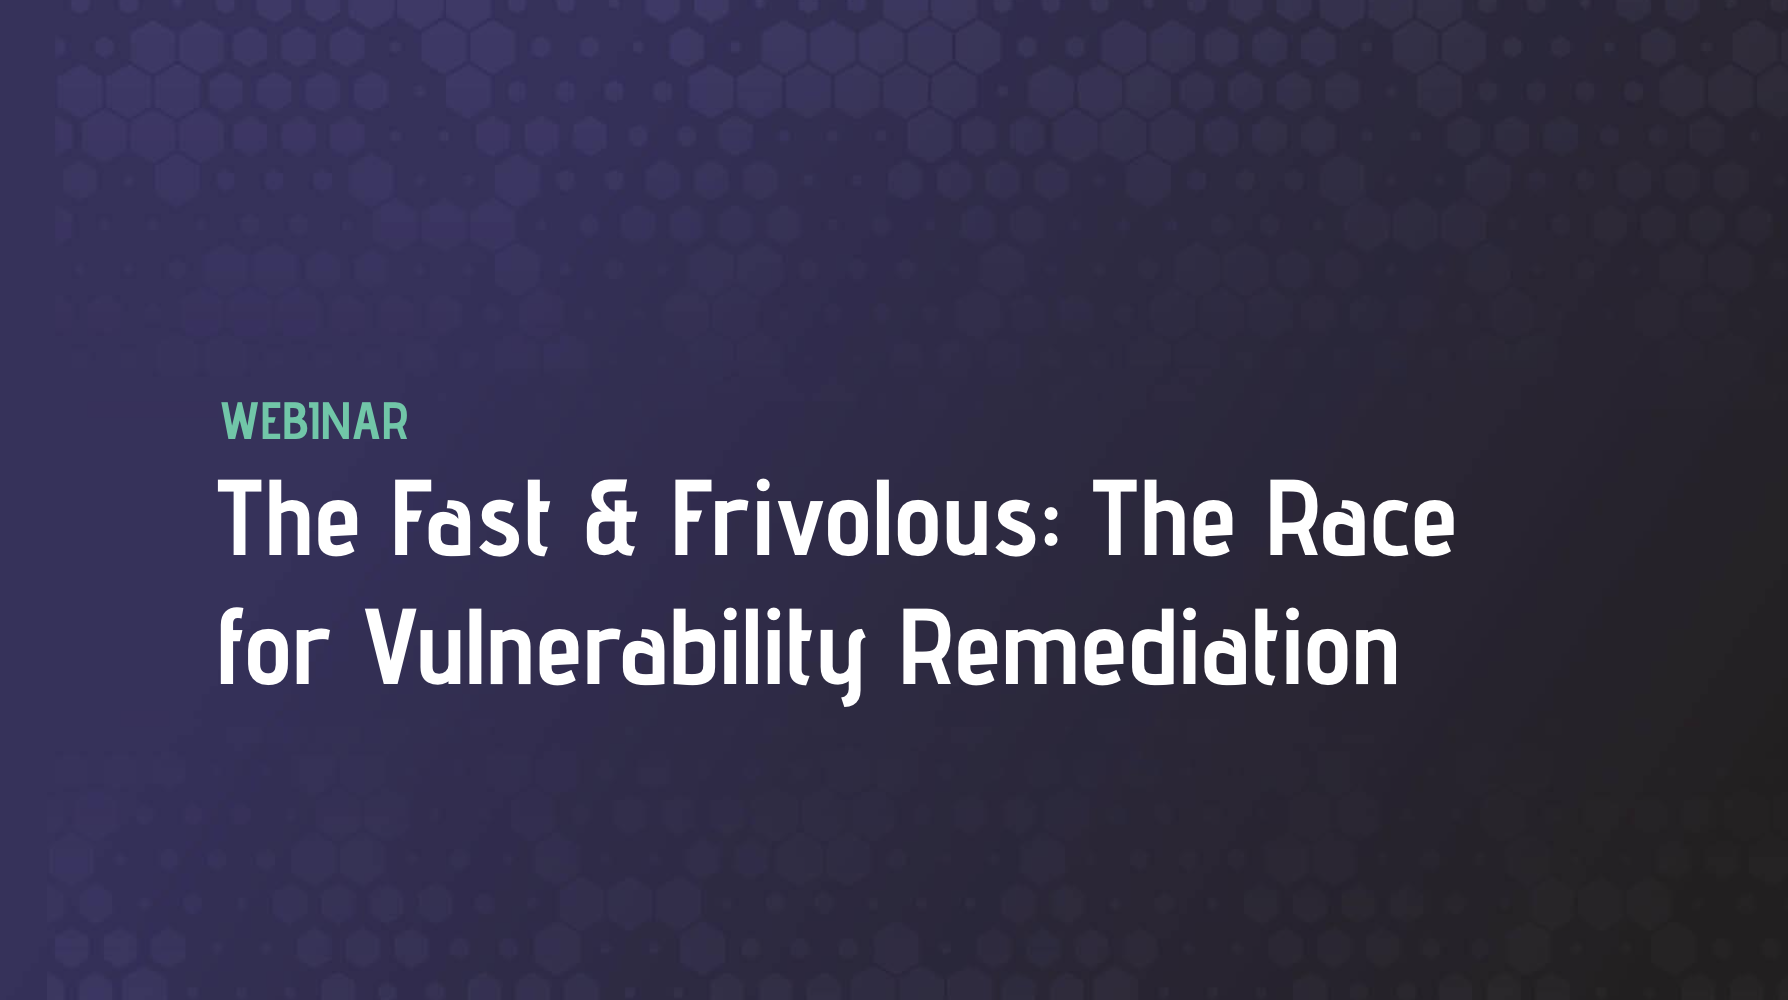 The Fast & Frivolous: The Race for Vulnerability Remediation